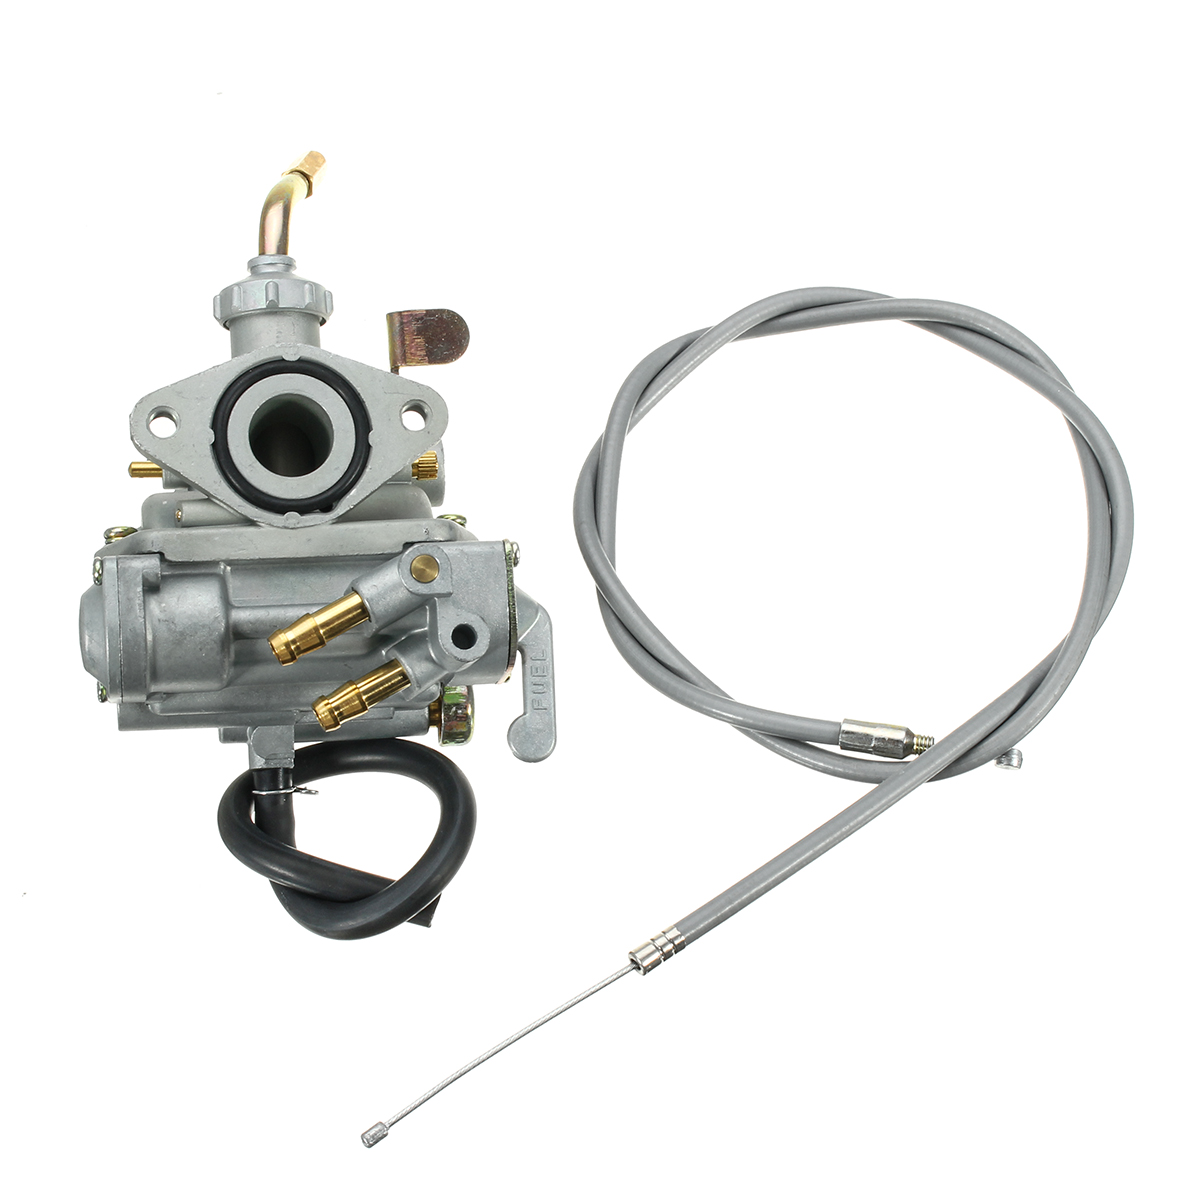 

Carburetor With Throttle Cable For Honda CT90 K3 K4 Trail Bike Motorcycle